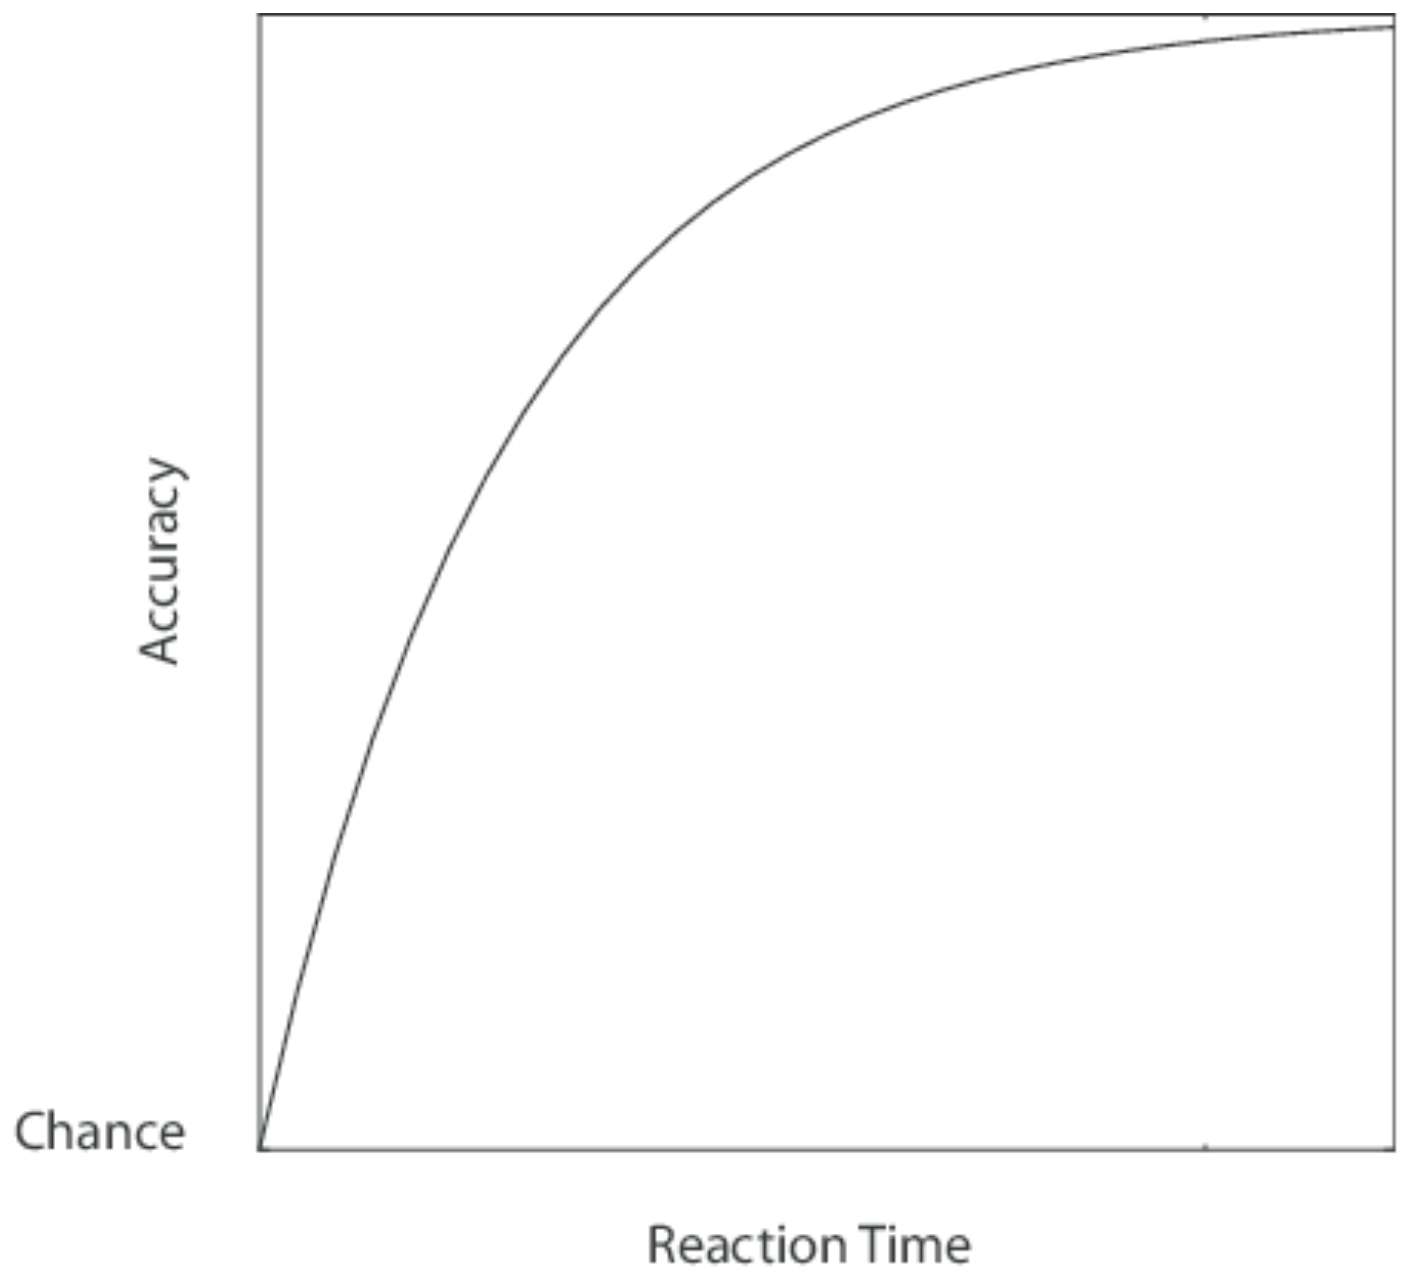 Idealized accuracy-speed tradeoff has a logarithmic relationship